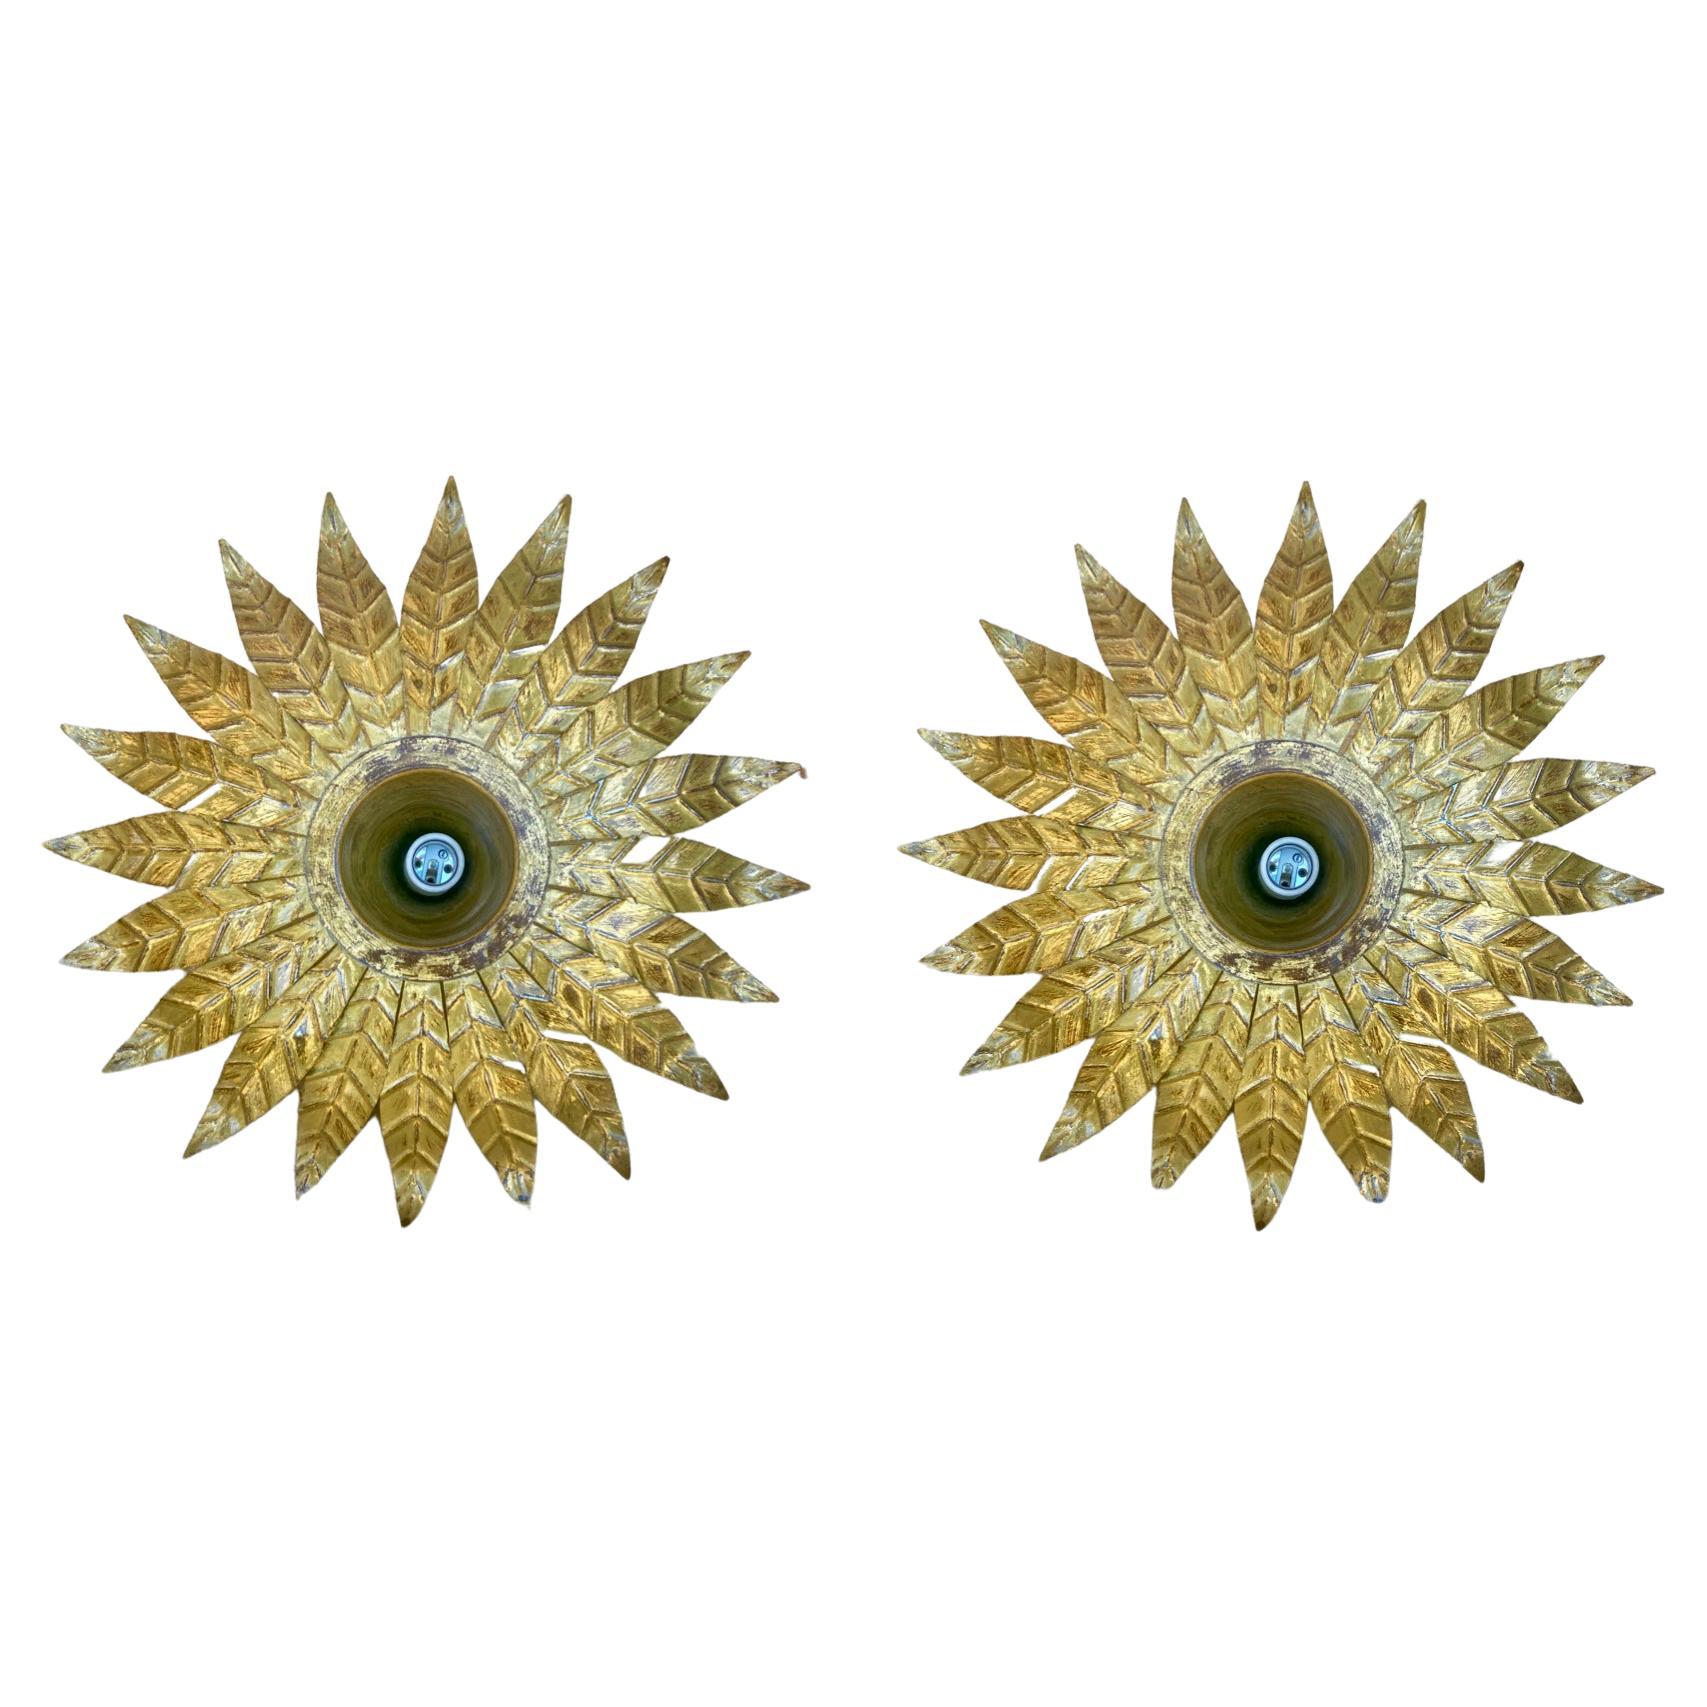 Pair of Mid-Century Spanish Sunburst Ceiling Light Fixture or Wall Sconce in Wro For Sale